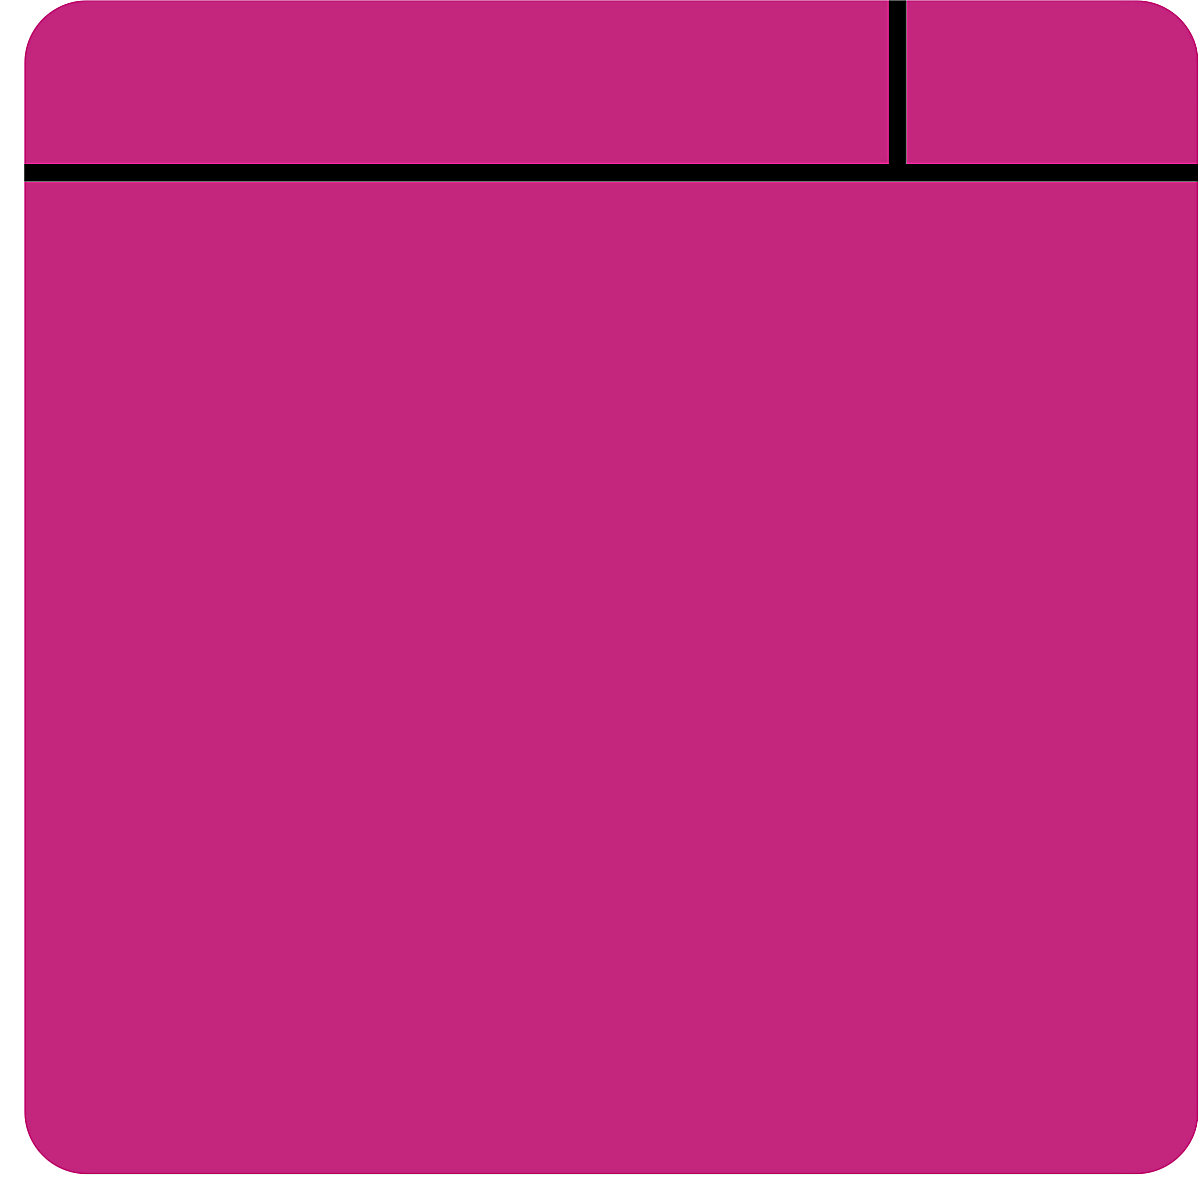 Post-it notes, magnetic, LxW 100 x 100 mm, pack of 10, pink-7